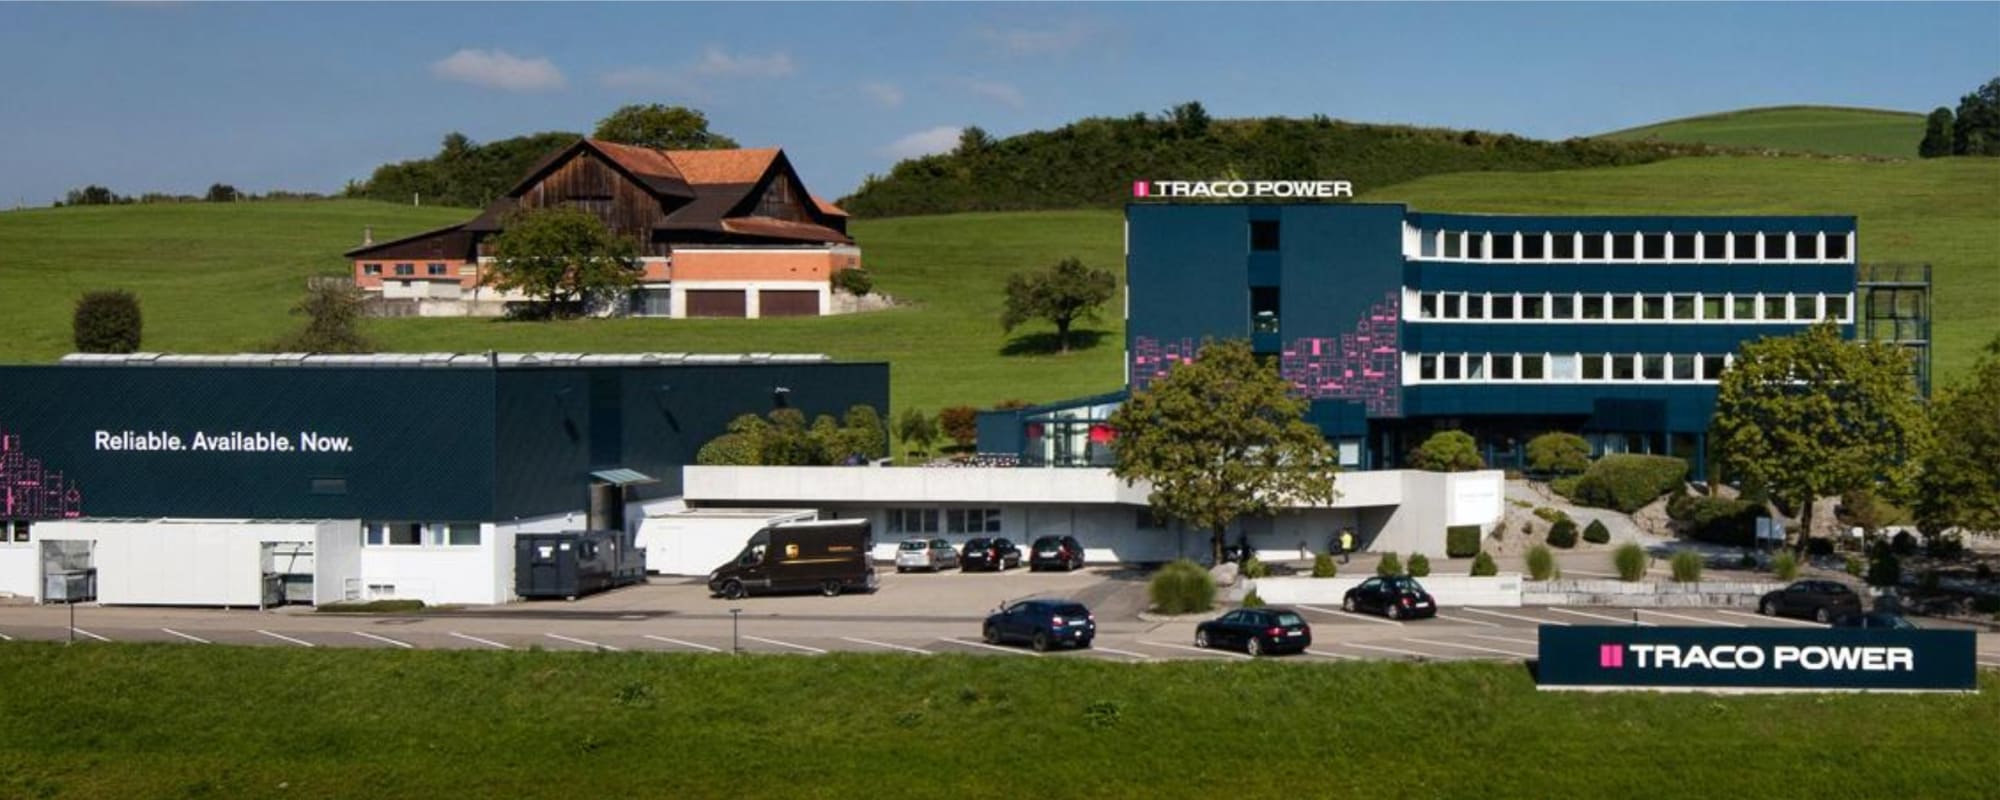 TRACO POWER office